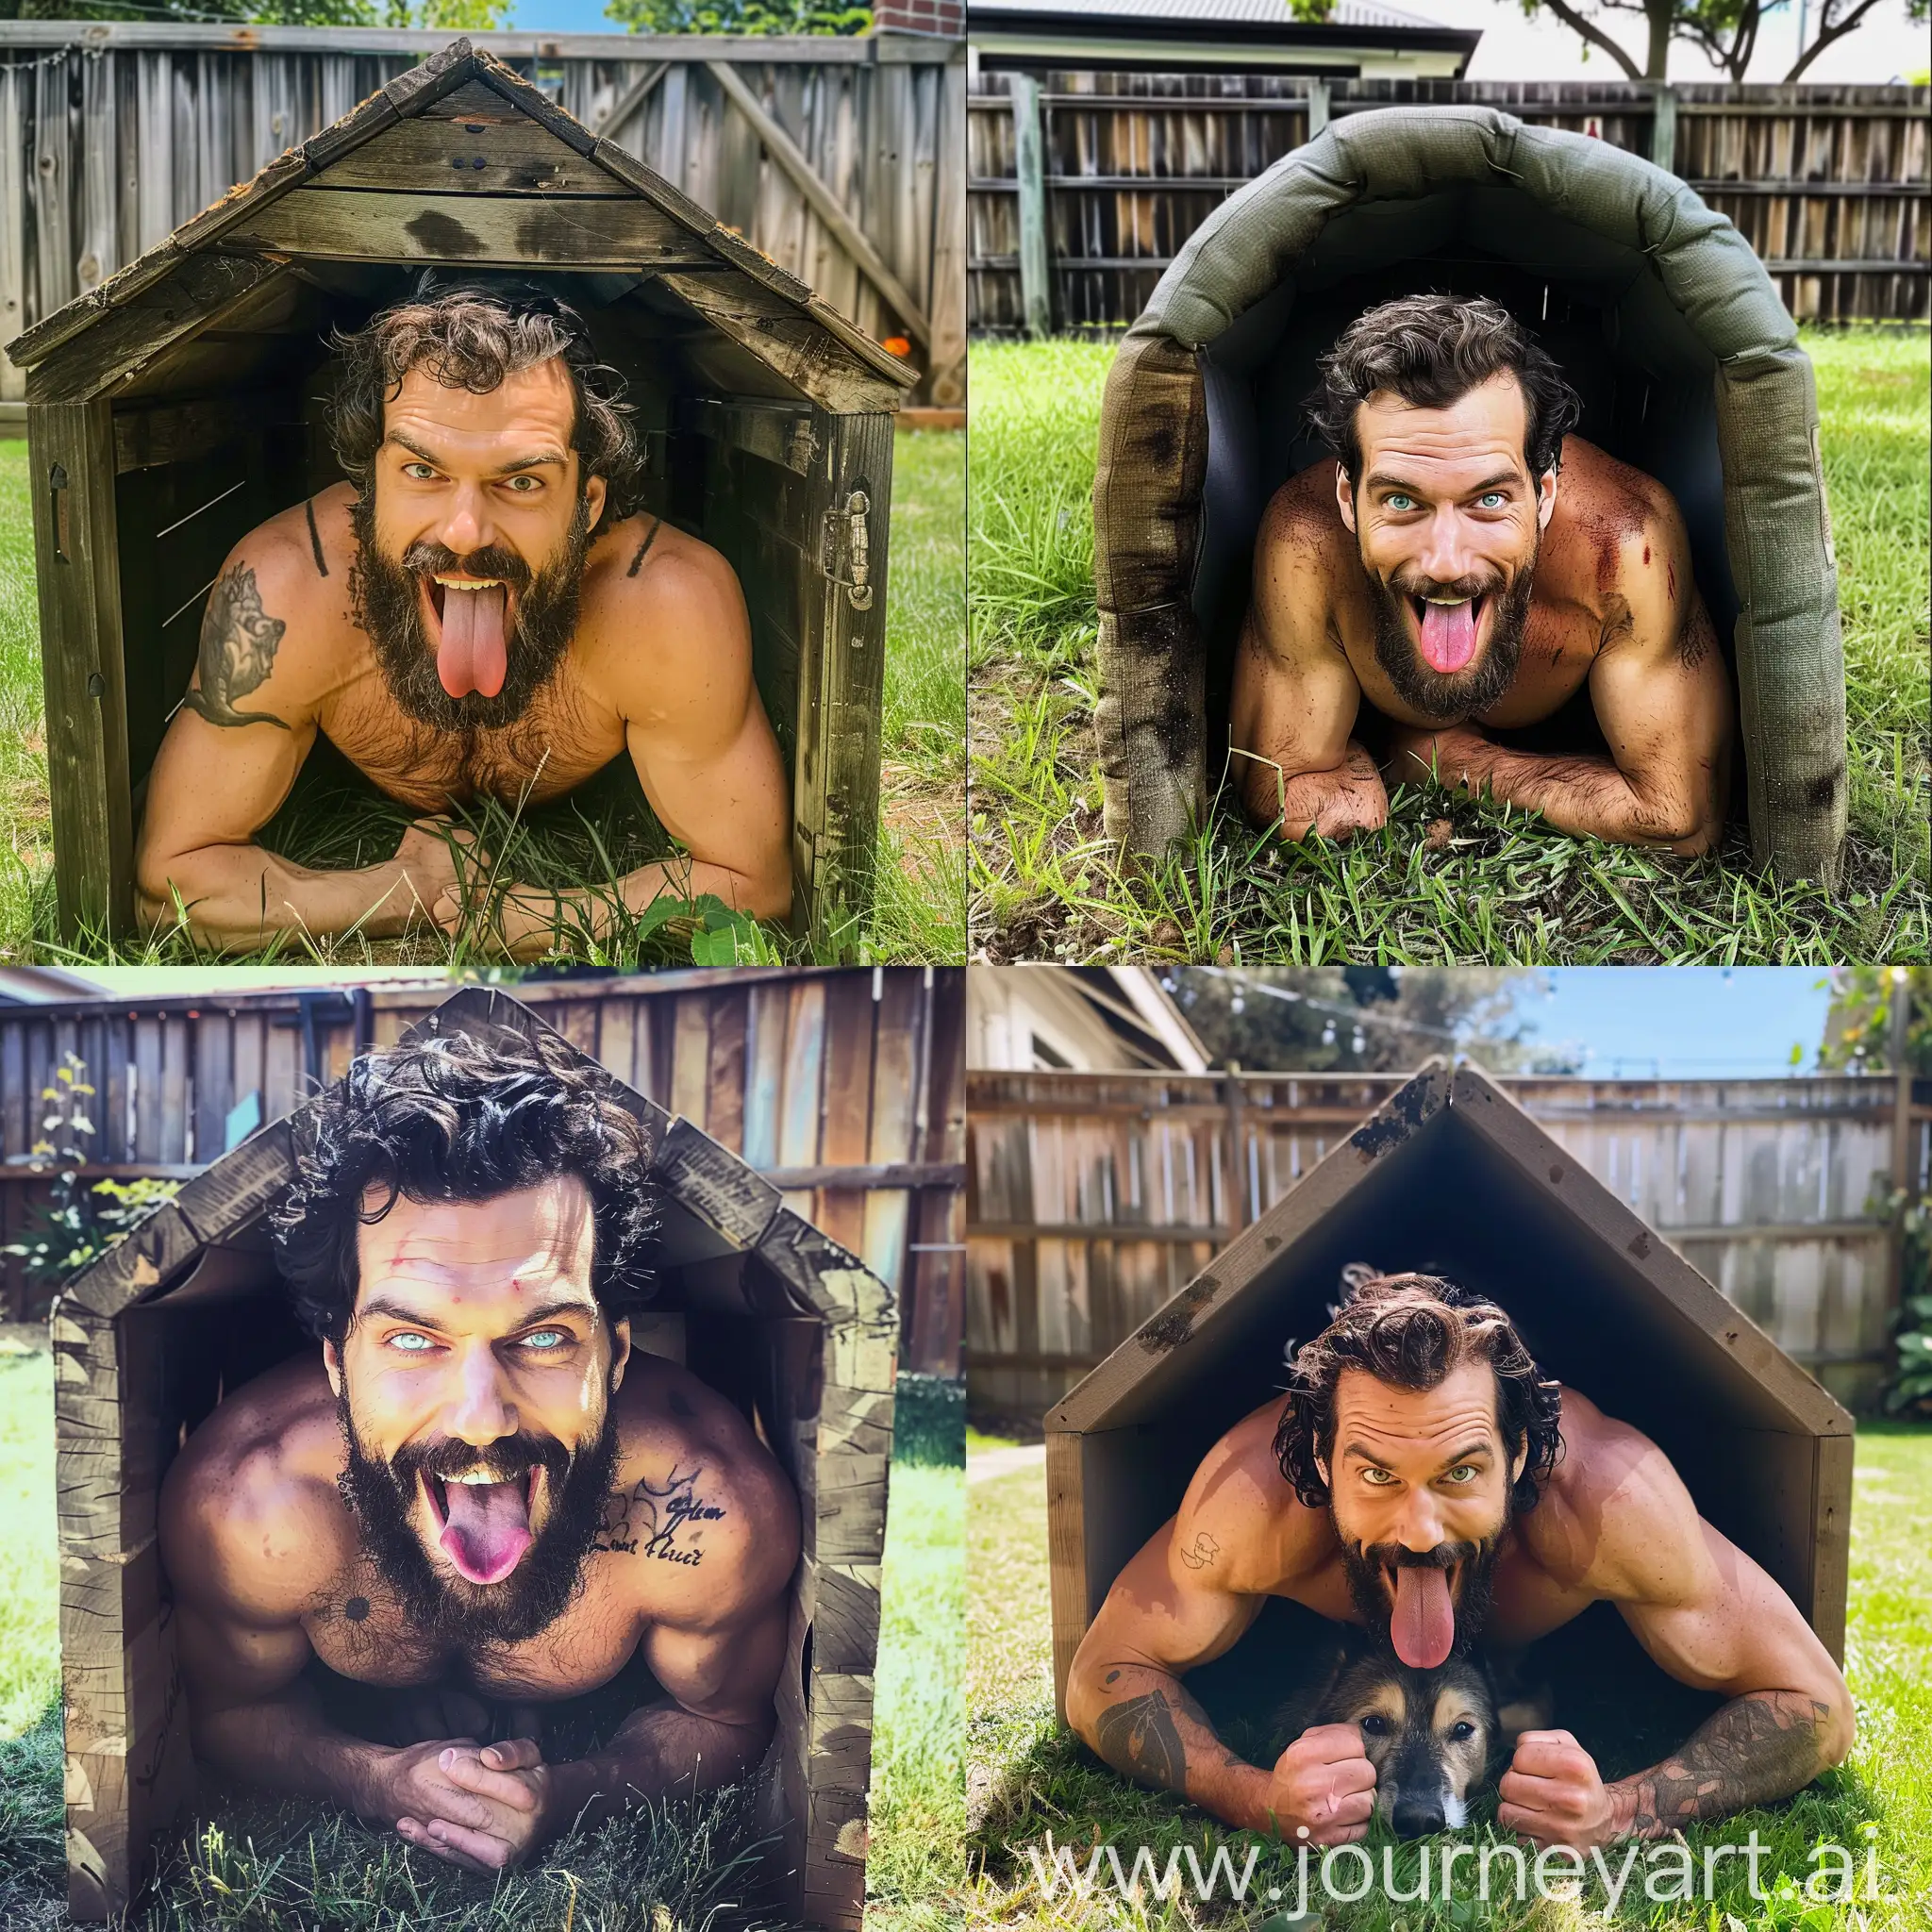 Beautiful day, Good looking burly Henry Cavill crawling on all fous inside a dog house, burly big Henry Cavill inside a small dog house, backyard background, bearded Henry Cavill with a happy face and tongue out, smiling with his tongue out, with his eyes white and blank, hairy chest, grass backyard